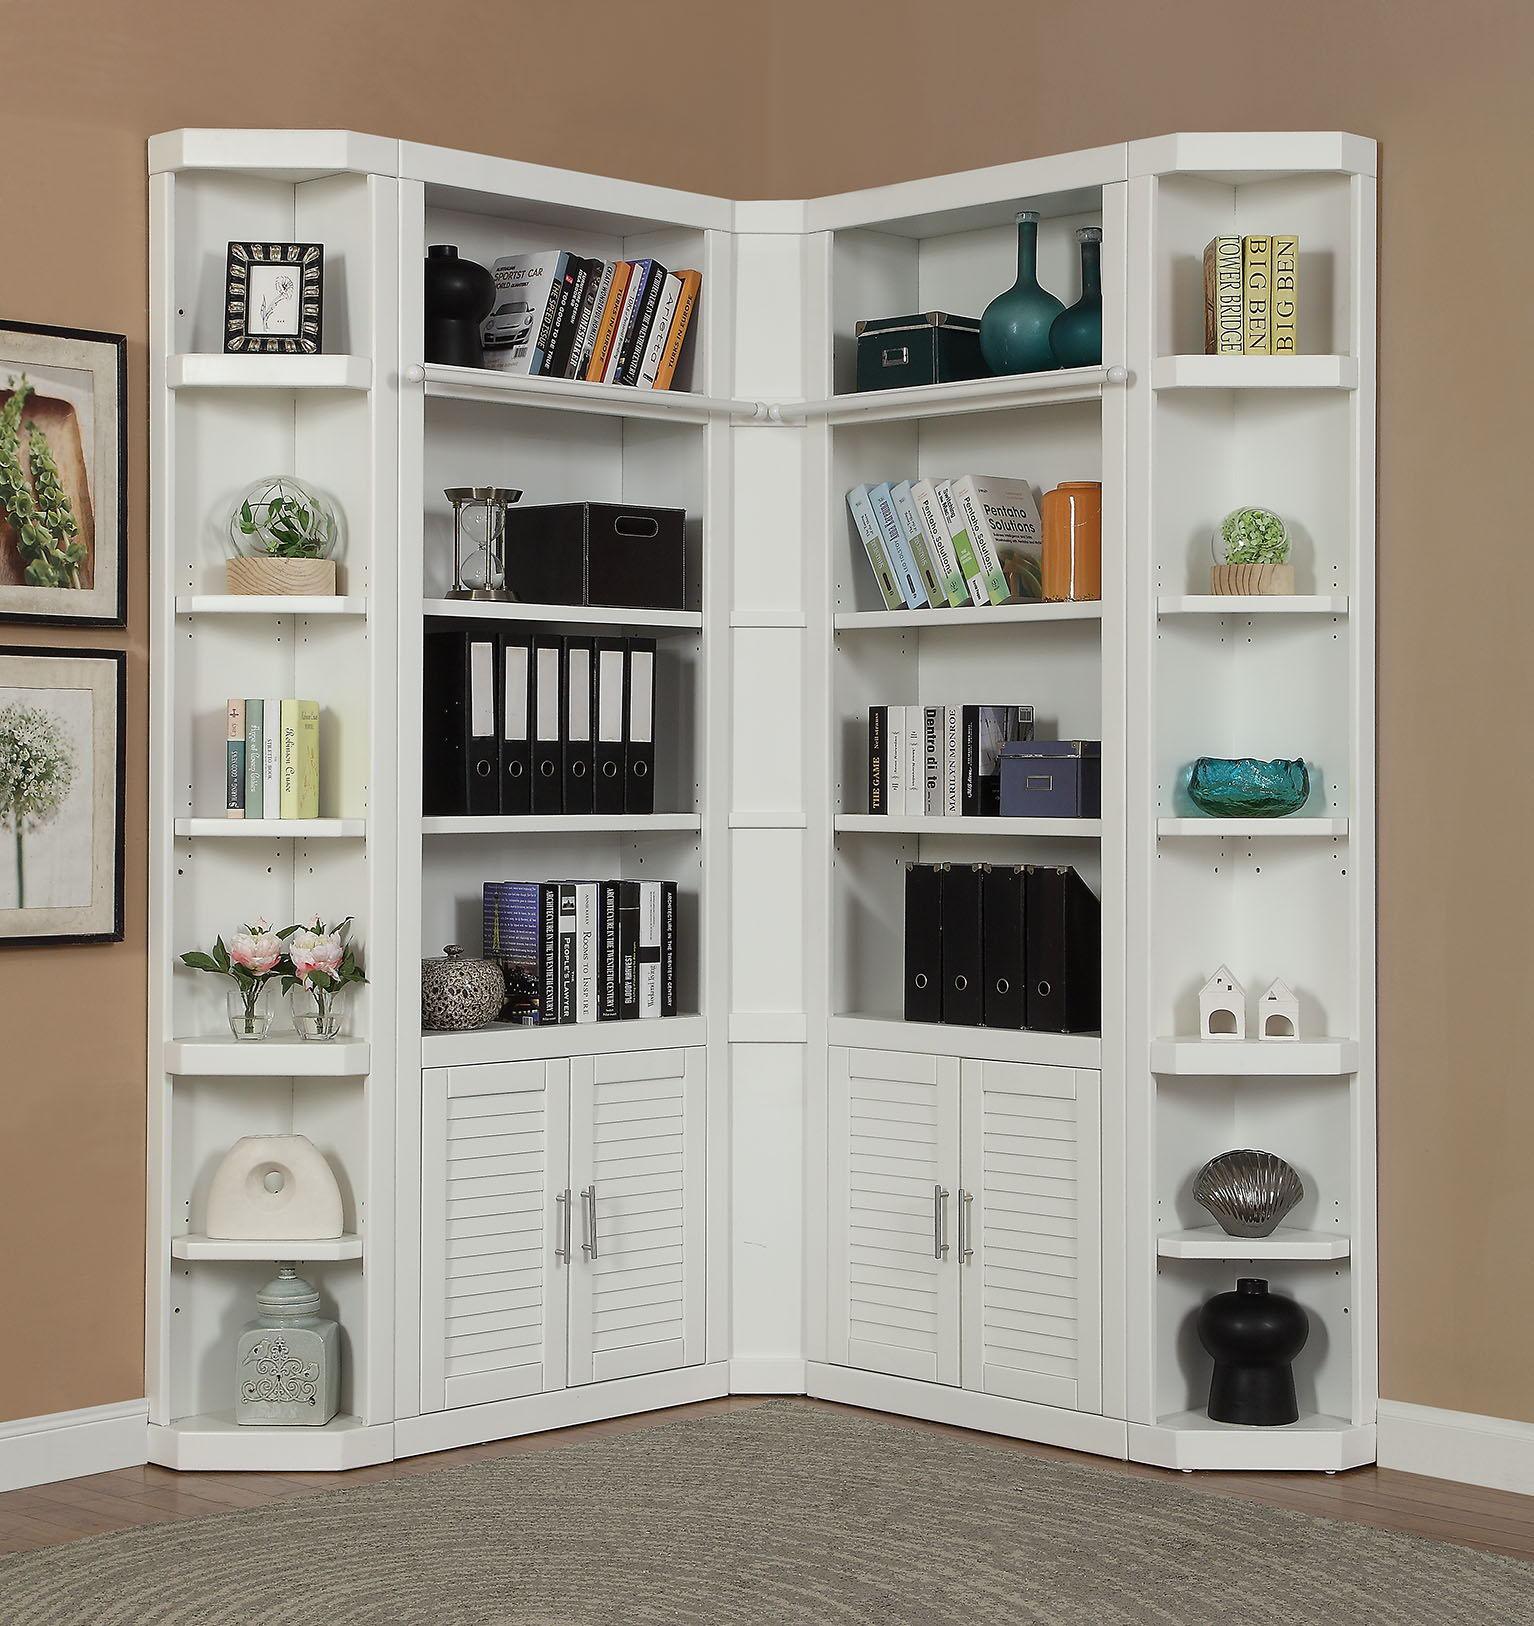 Parker House Furniture - Catalina - 5 Piece Corner Library Wall - Cottage White - 5th Avenue Furniture